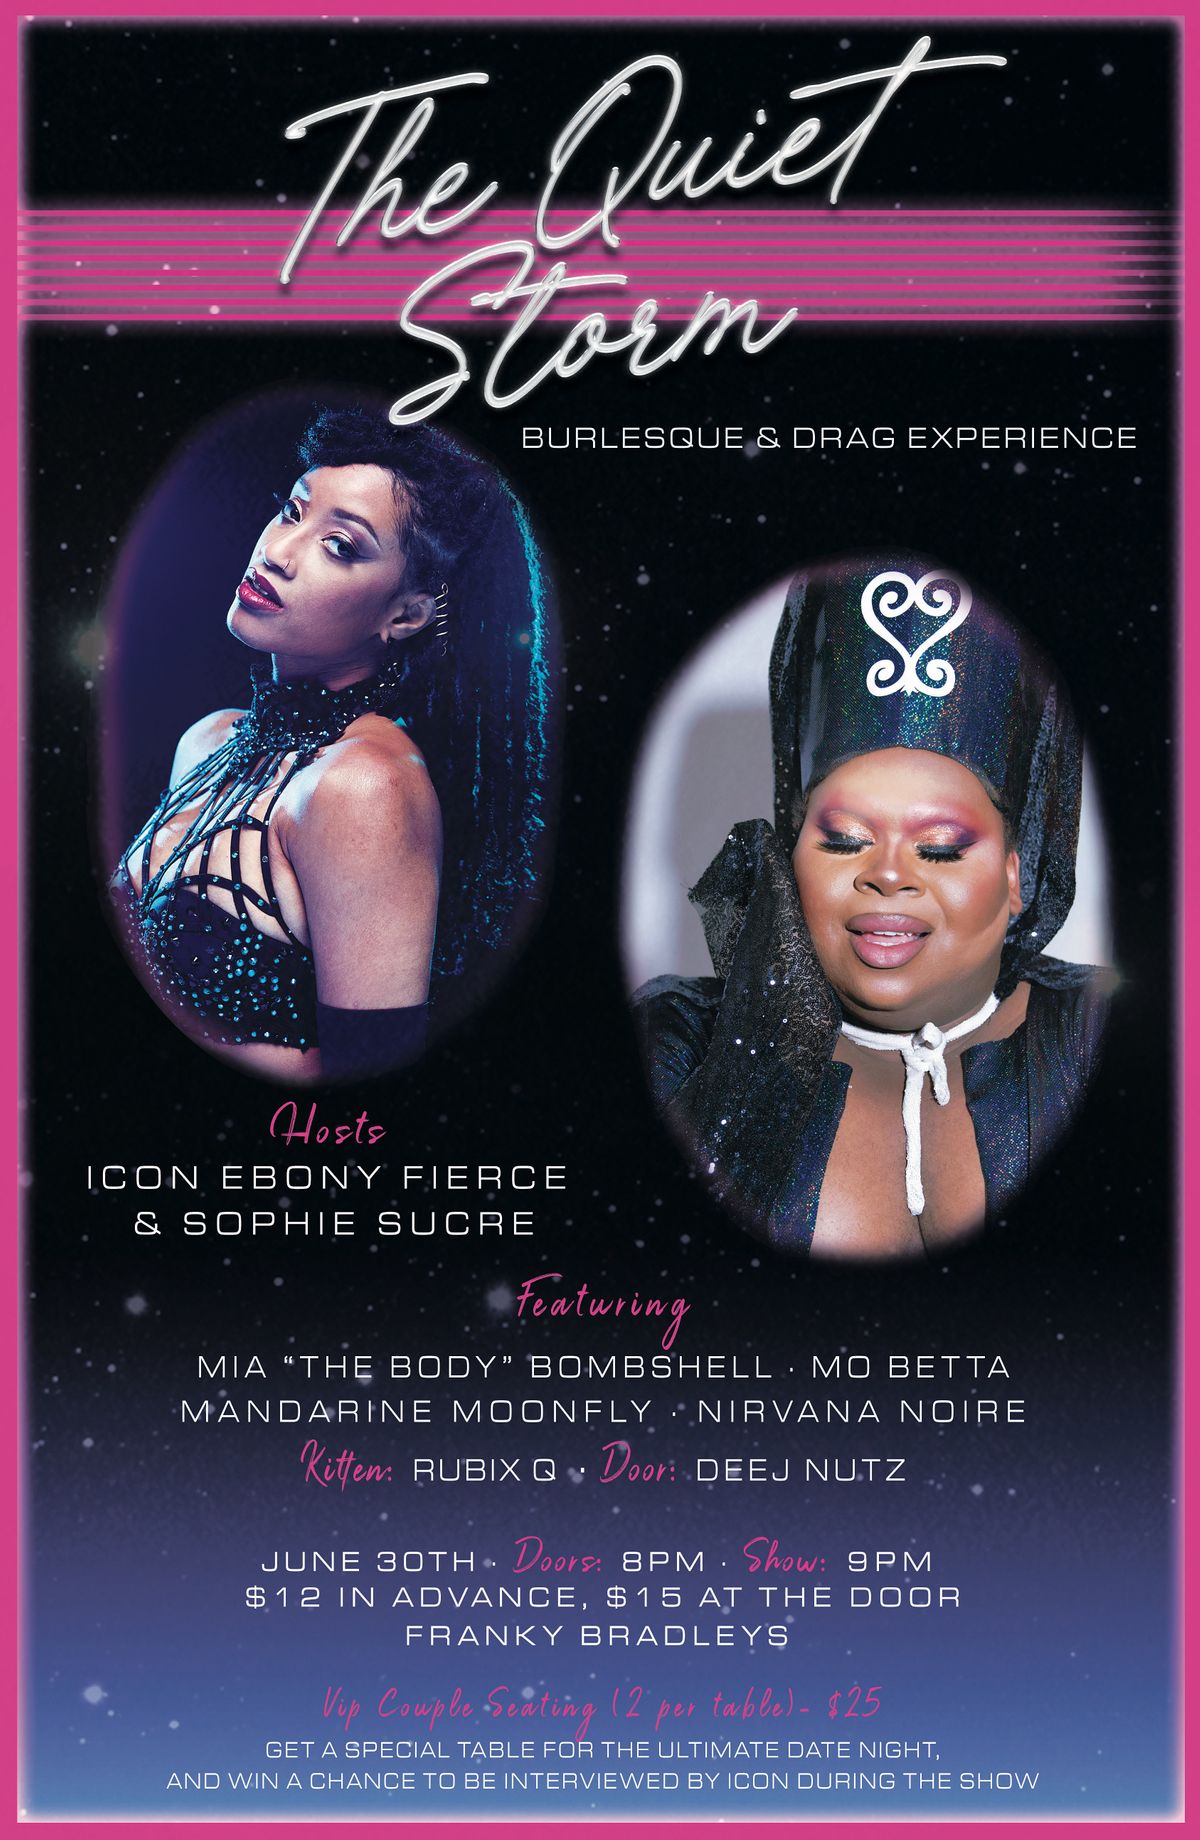 The Quiet Storm: An R&B Drag and Burlesque Experience